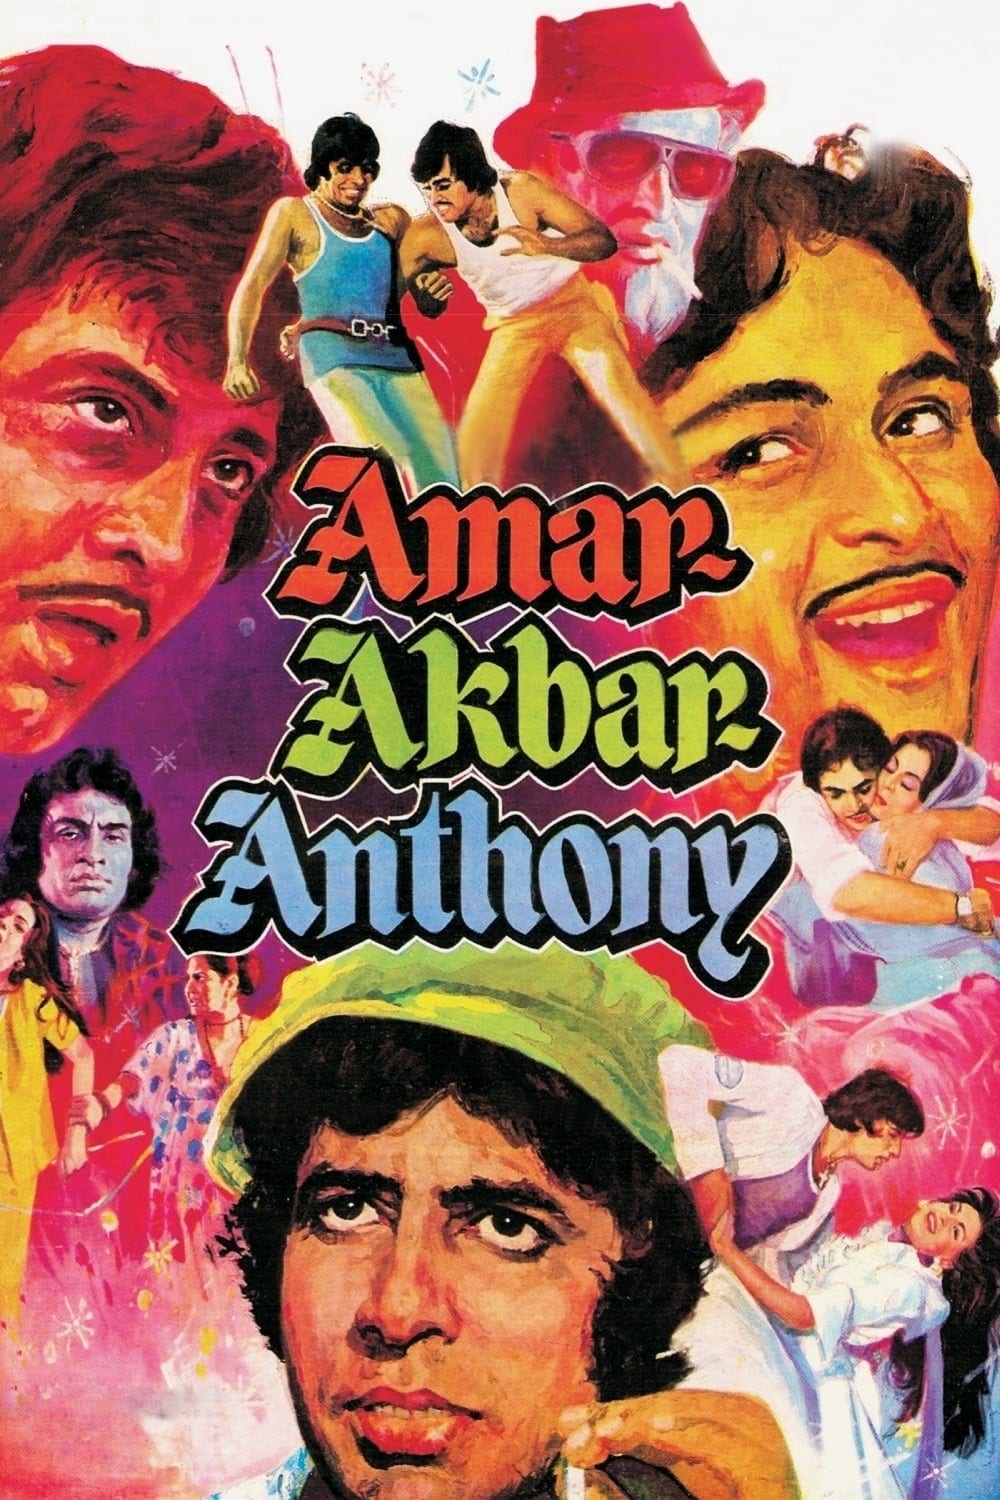 Poster for the movie "Amar Akbar Anthony"